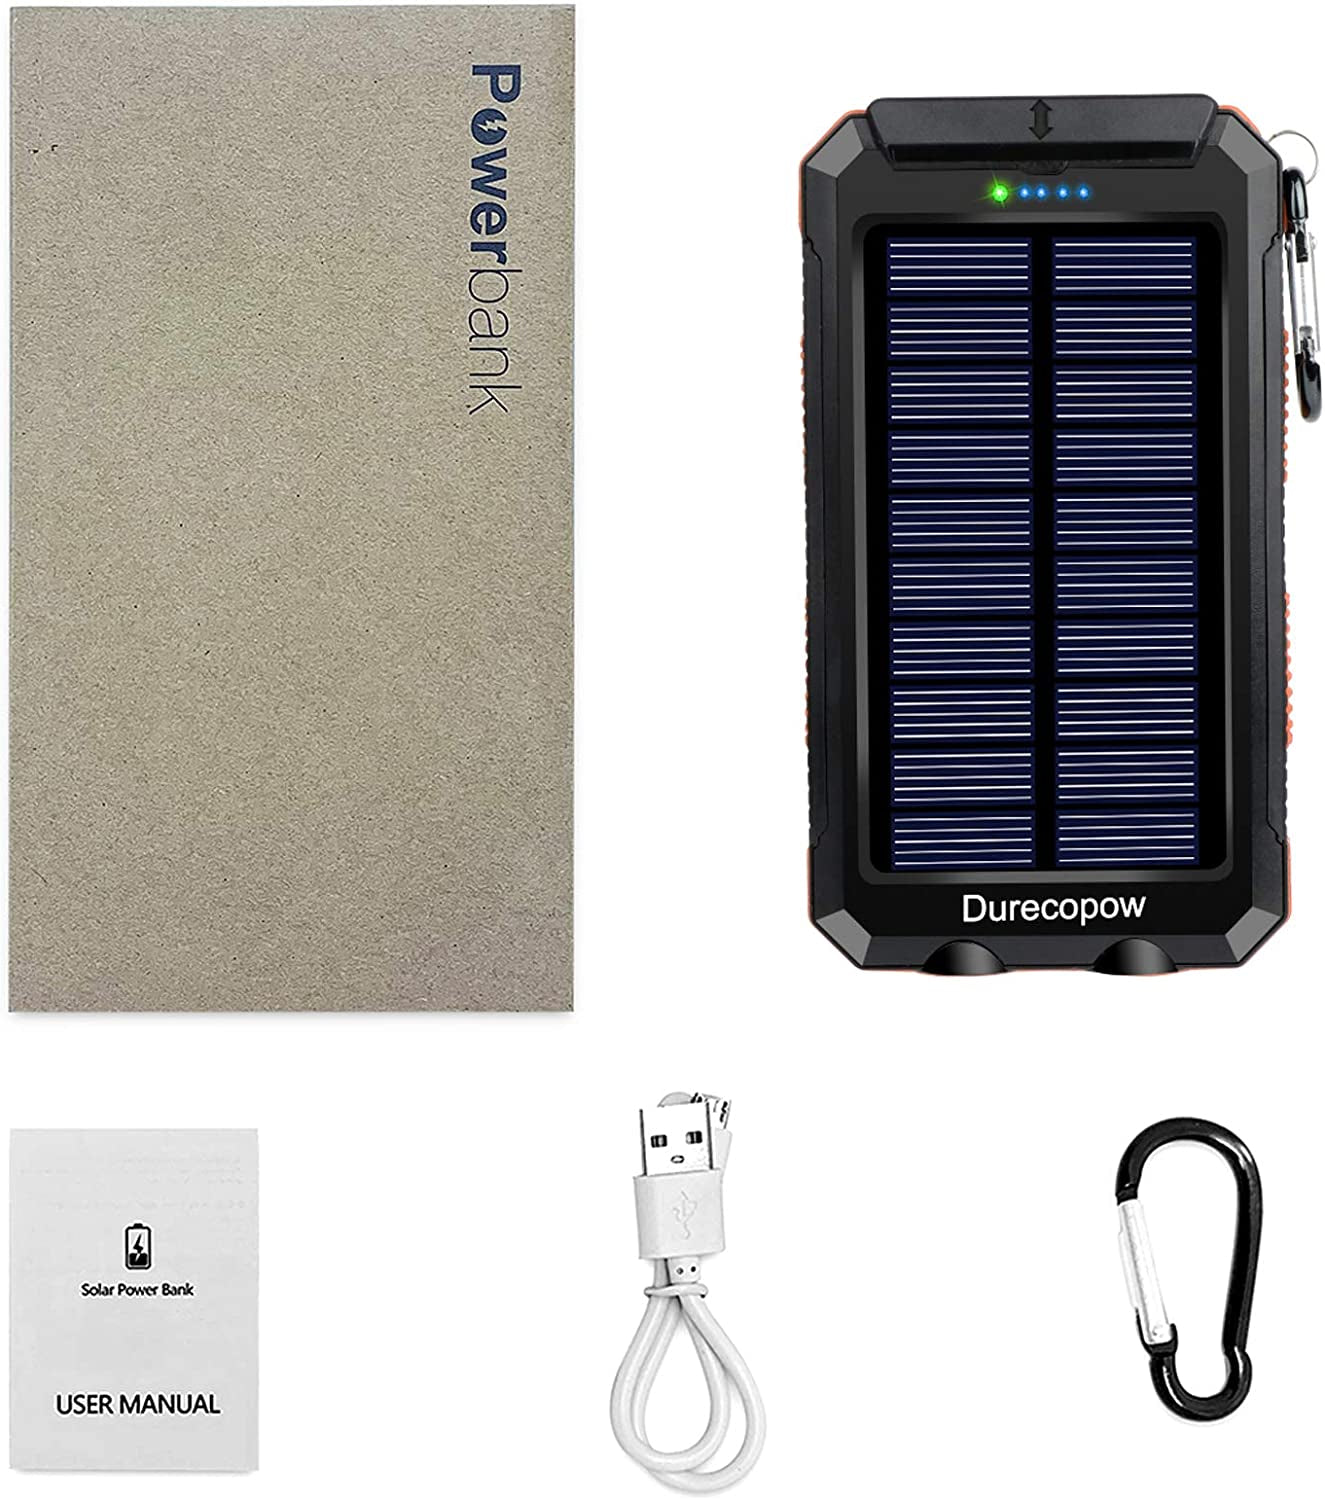 Durecopow Solar Charger, 20000Mah Portable Outdoor Waterproof Solar Power Bank, Camping External Backup Battery Pack Dual 5V USB Ports Output, 2 Led Light Flashlight with Compass (Orange)